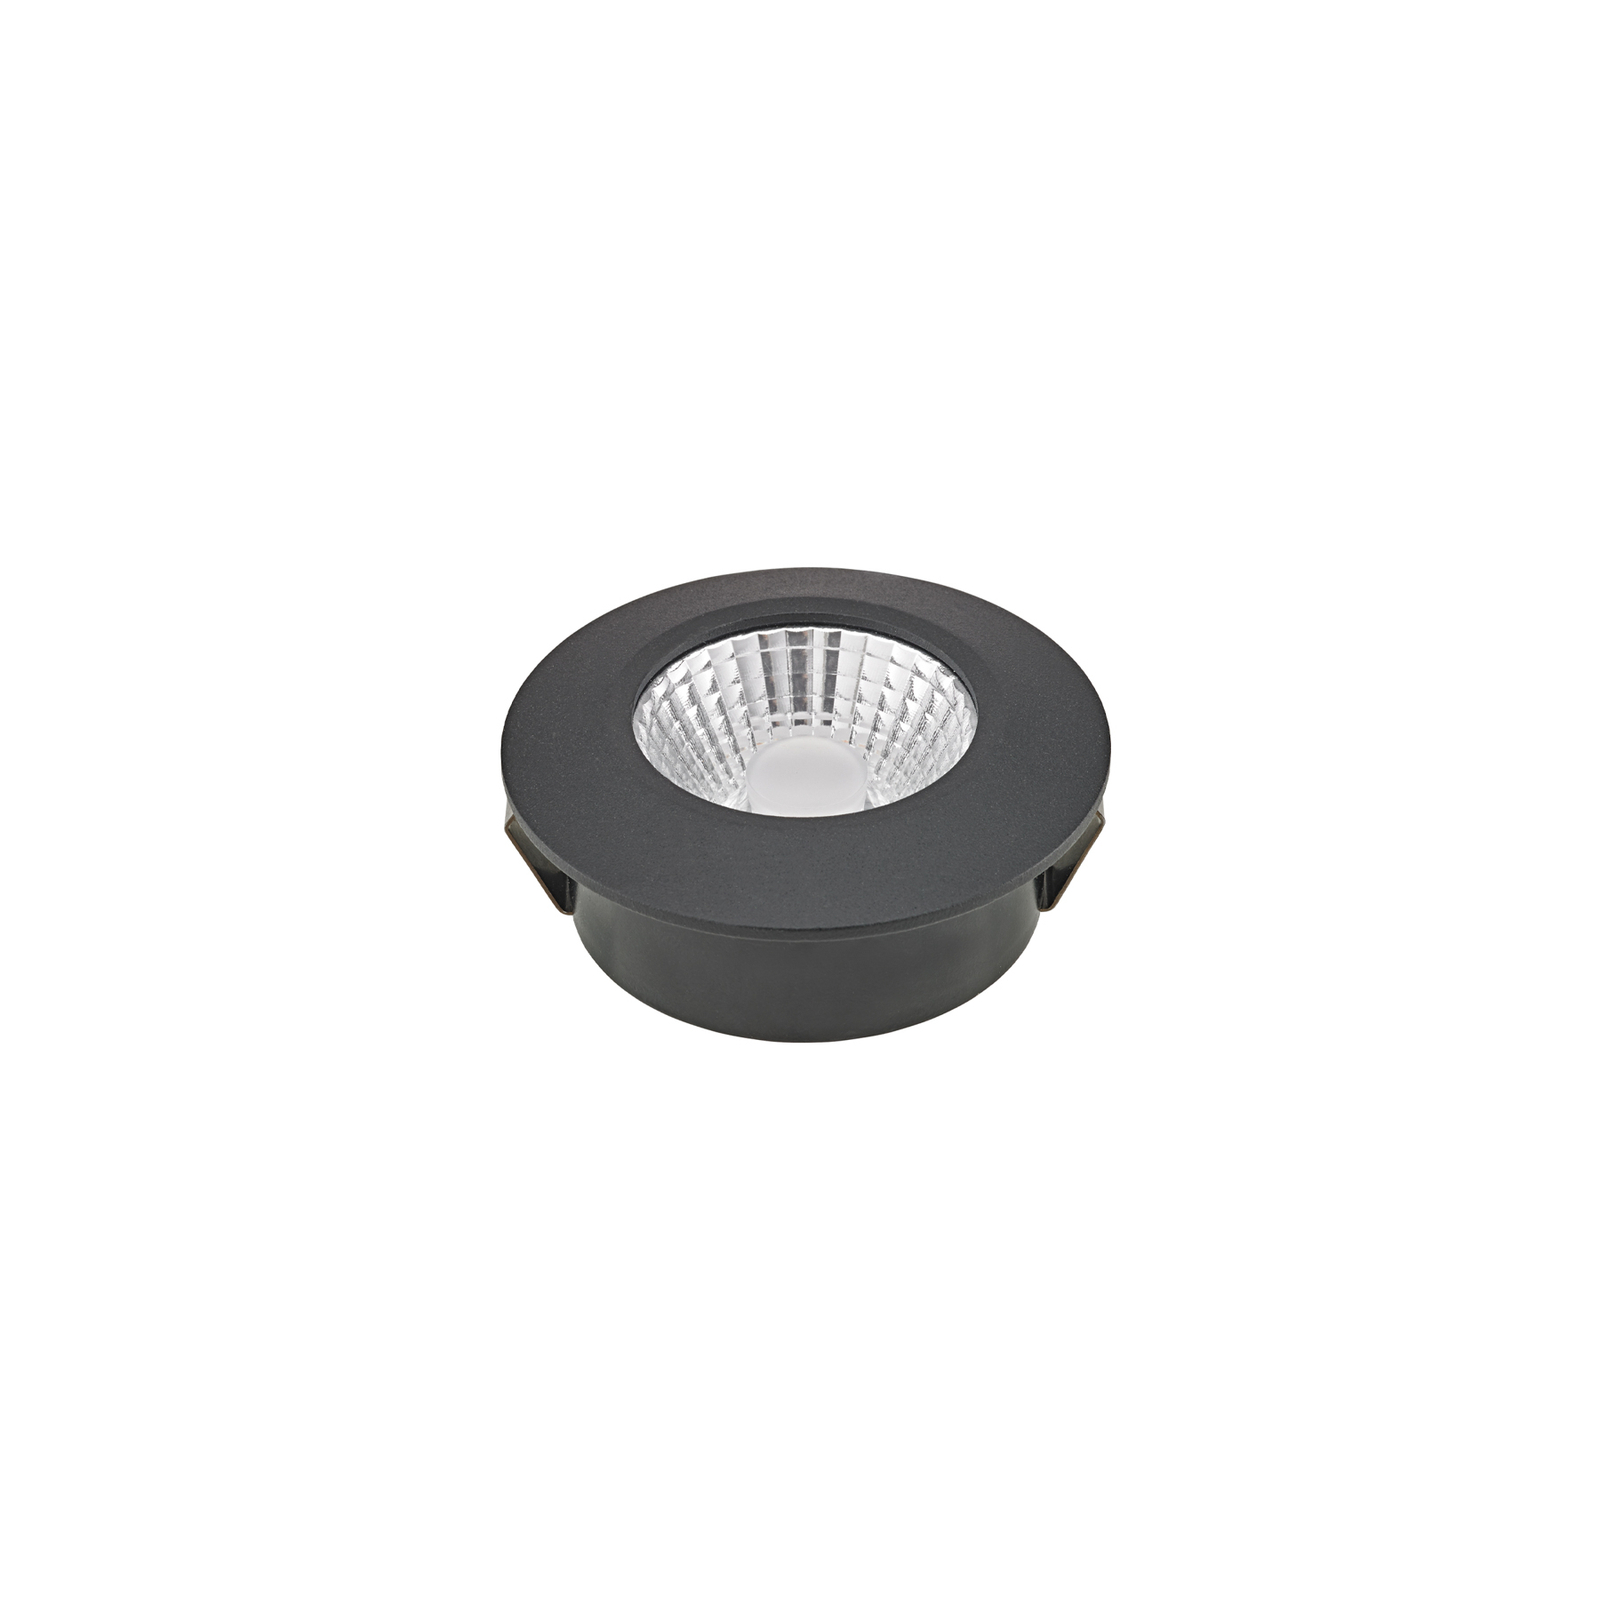 Diled LED recessed ceiling spotlight, Ø 6.7 cm, dimmable, black